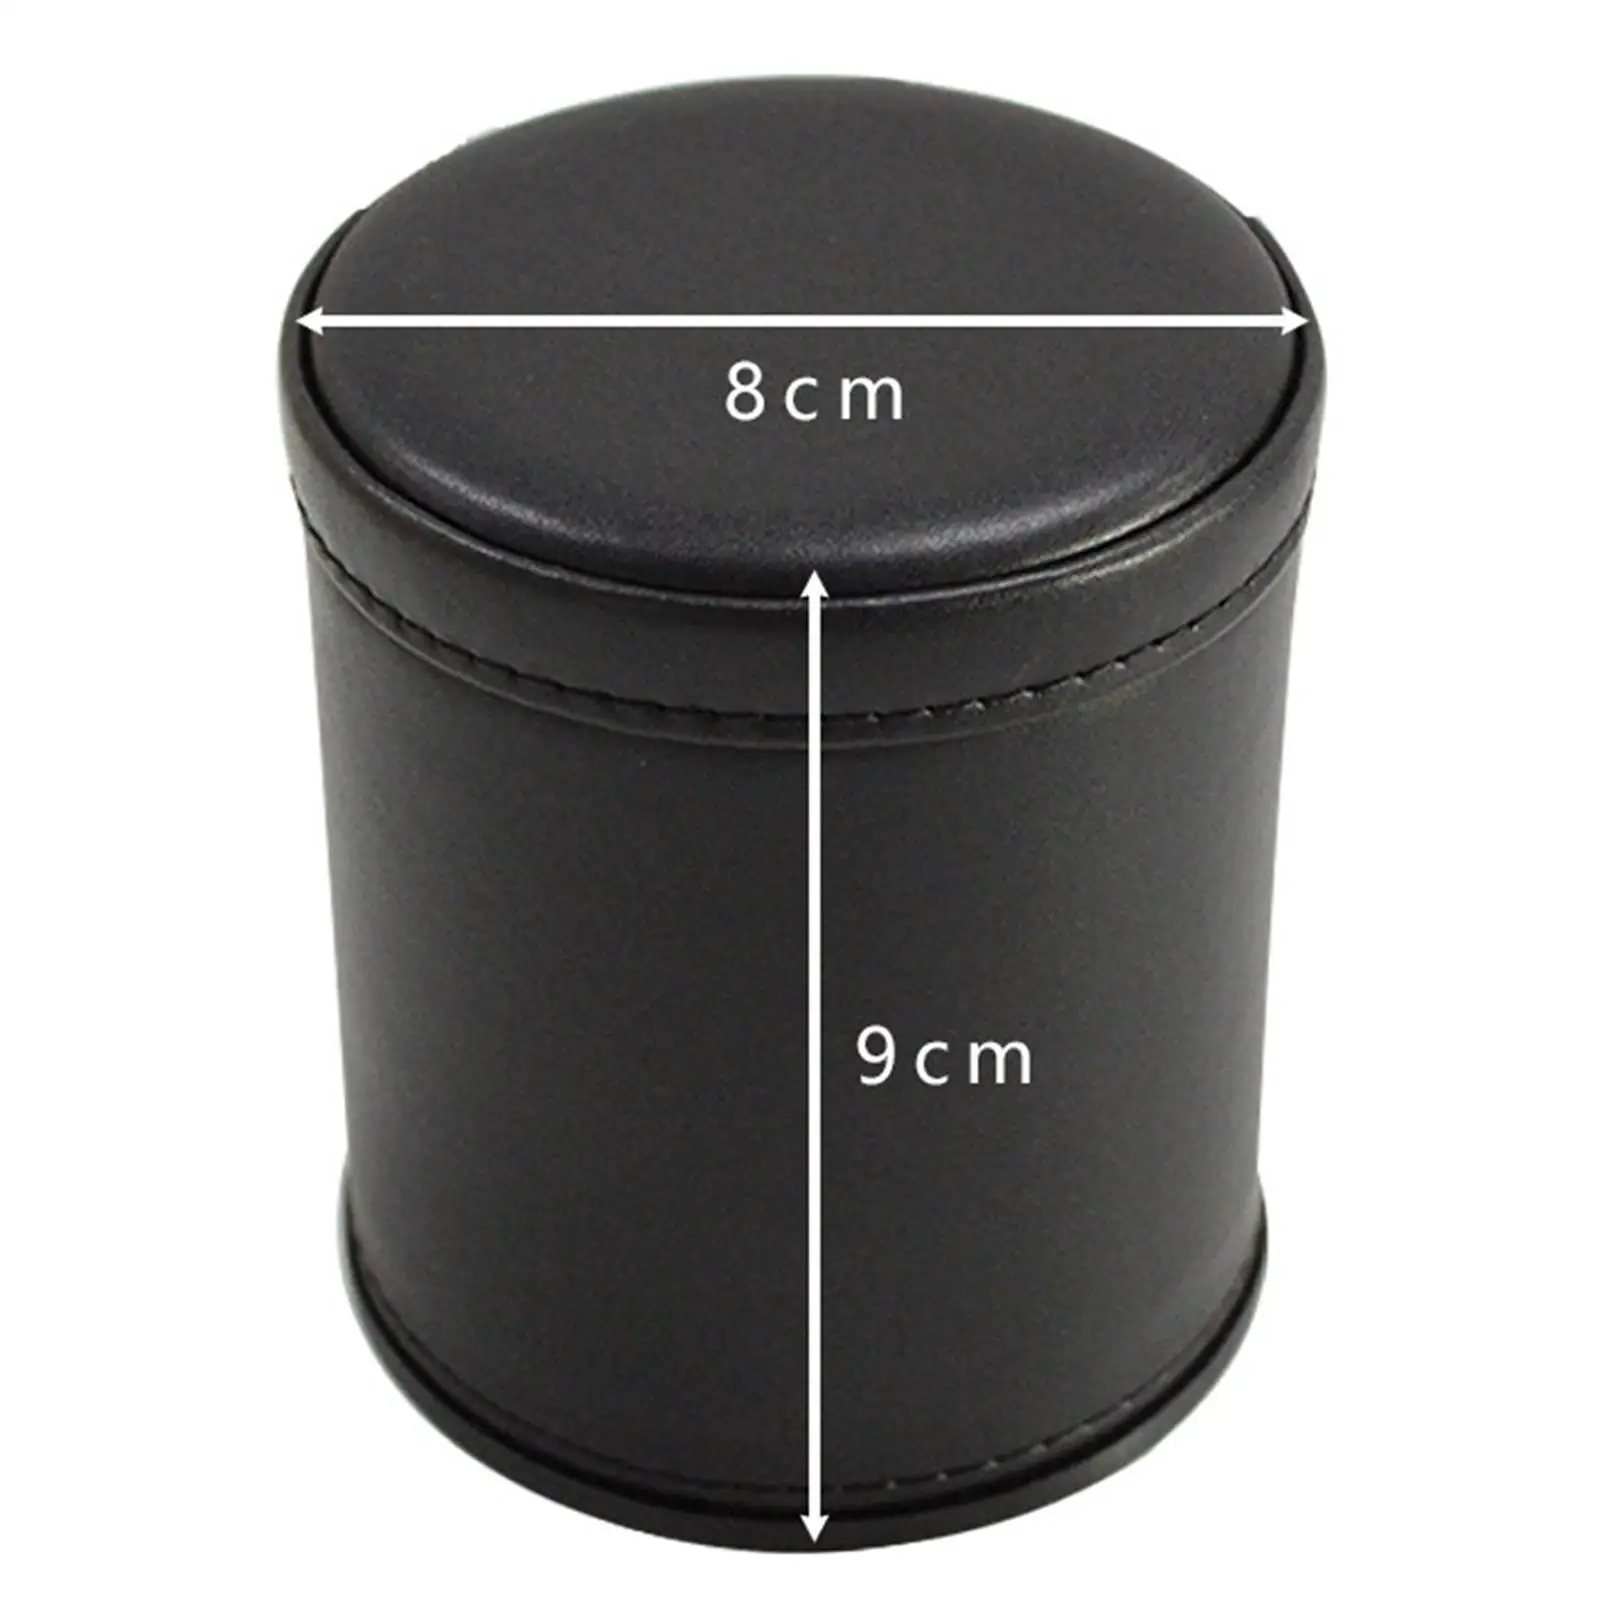 Manual Dice Cup Dice Game Accessories Professional Entertainment Leather Dice Shaker Dice Decider for Club Ktv Home Party Family